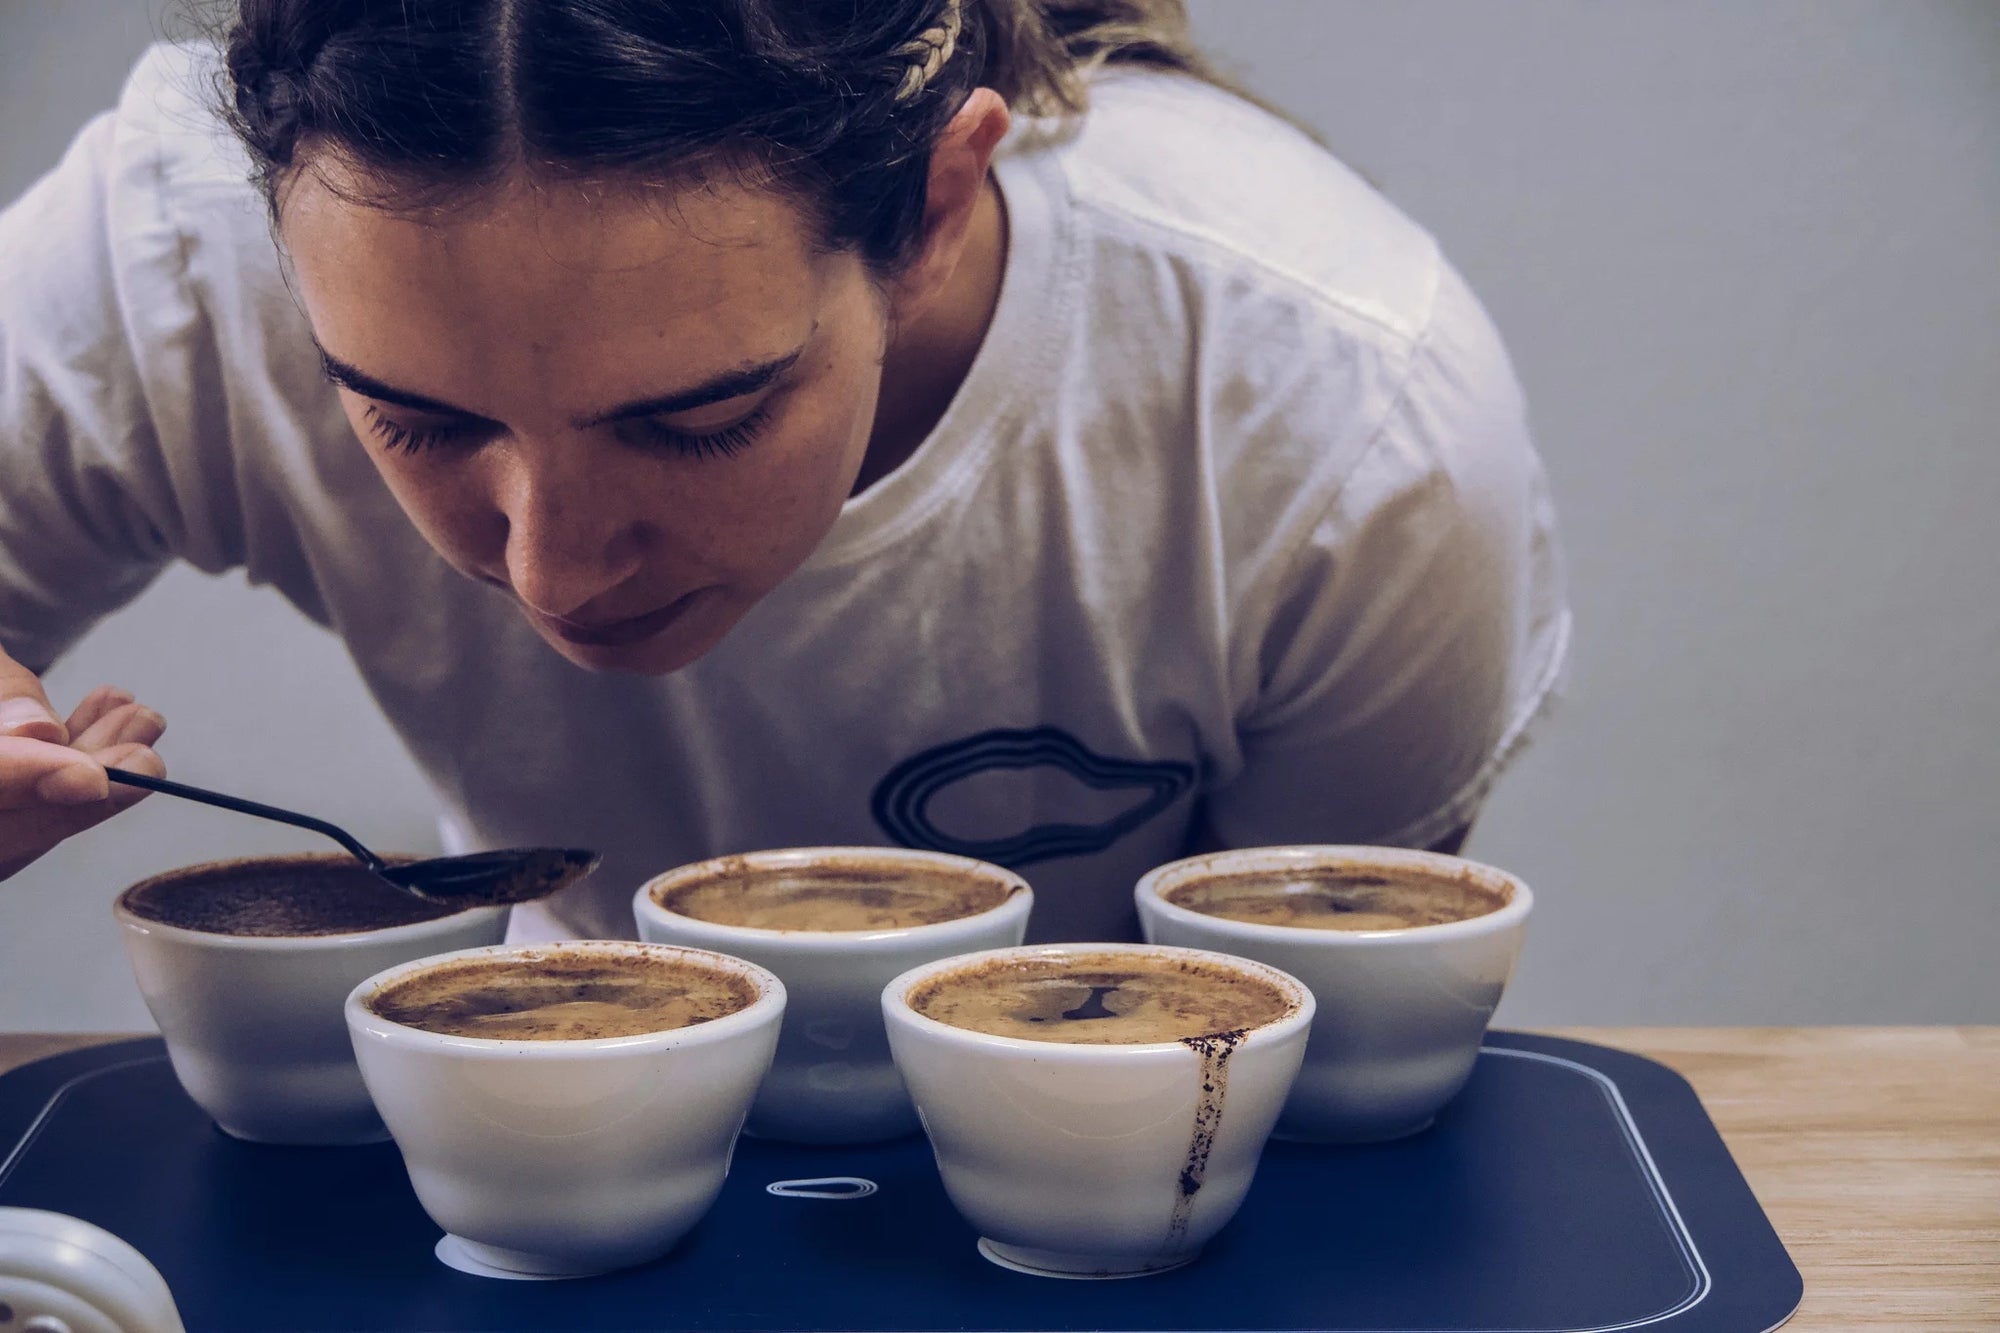 Breaking the crust while cupping coffee